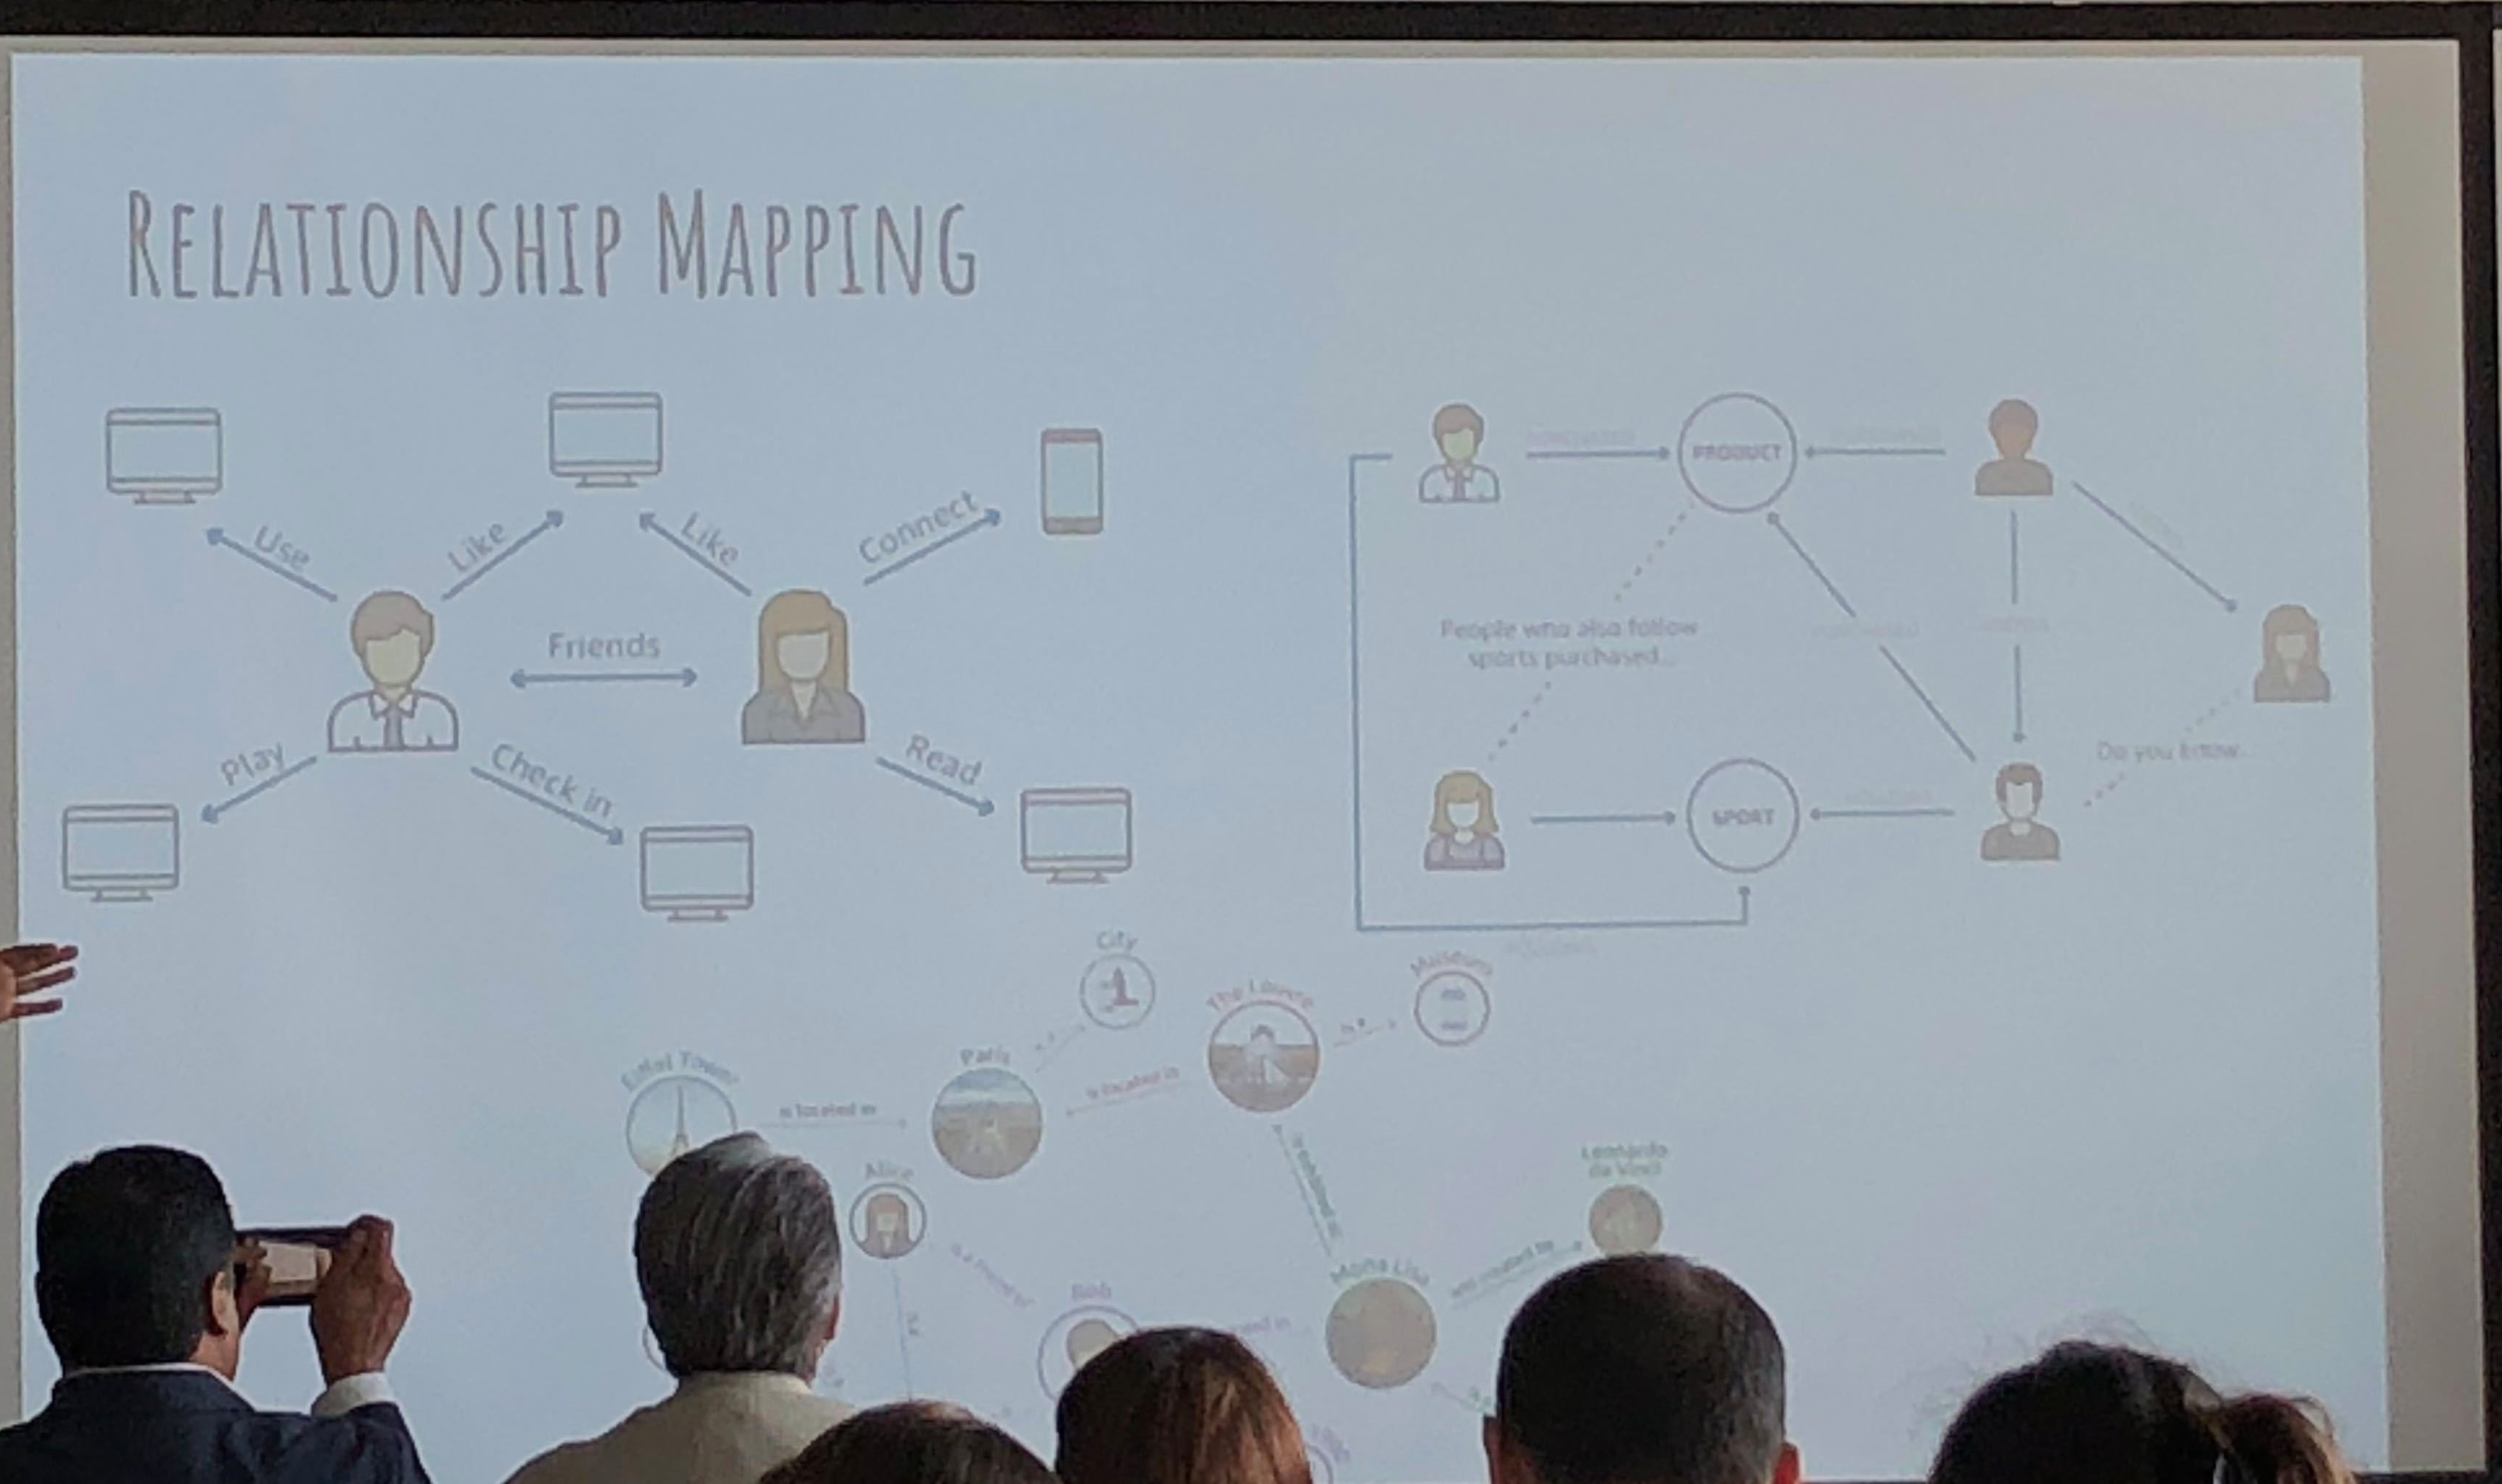 Relationship Mapping by Carnival for social selling